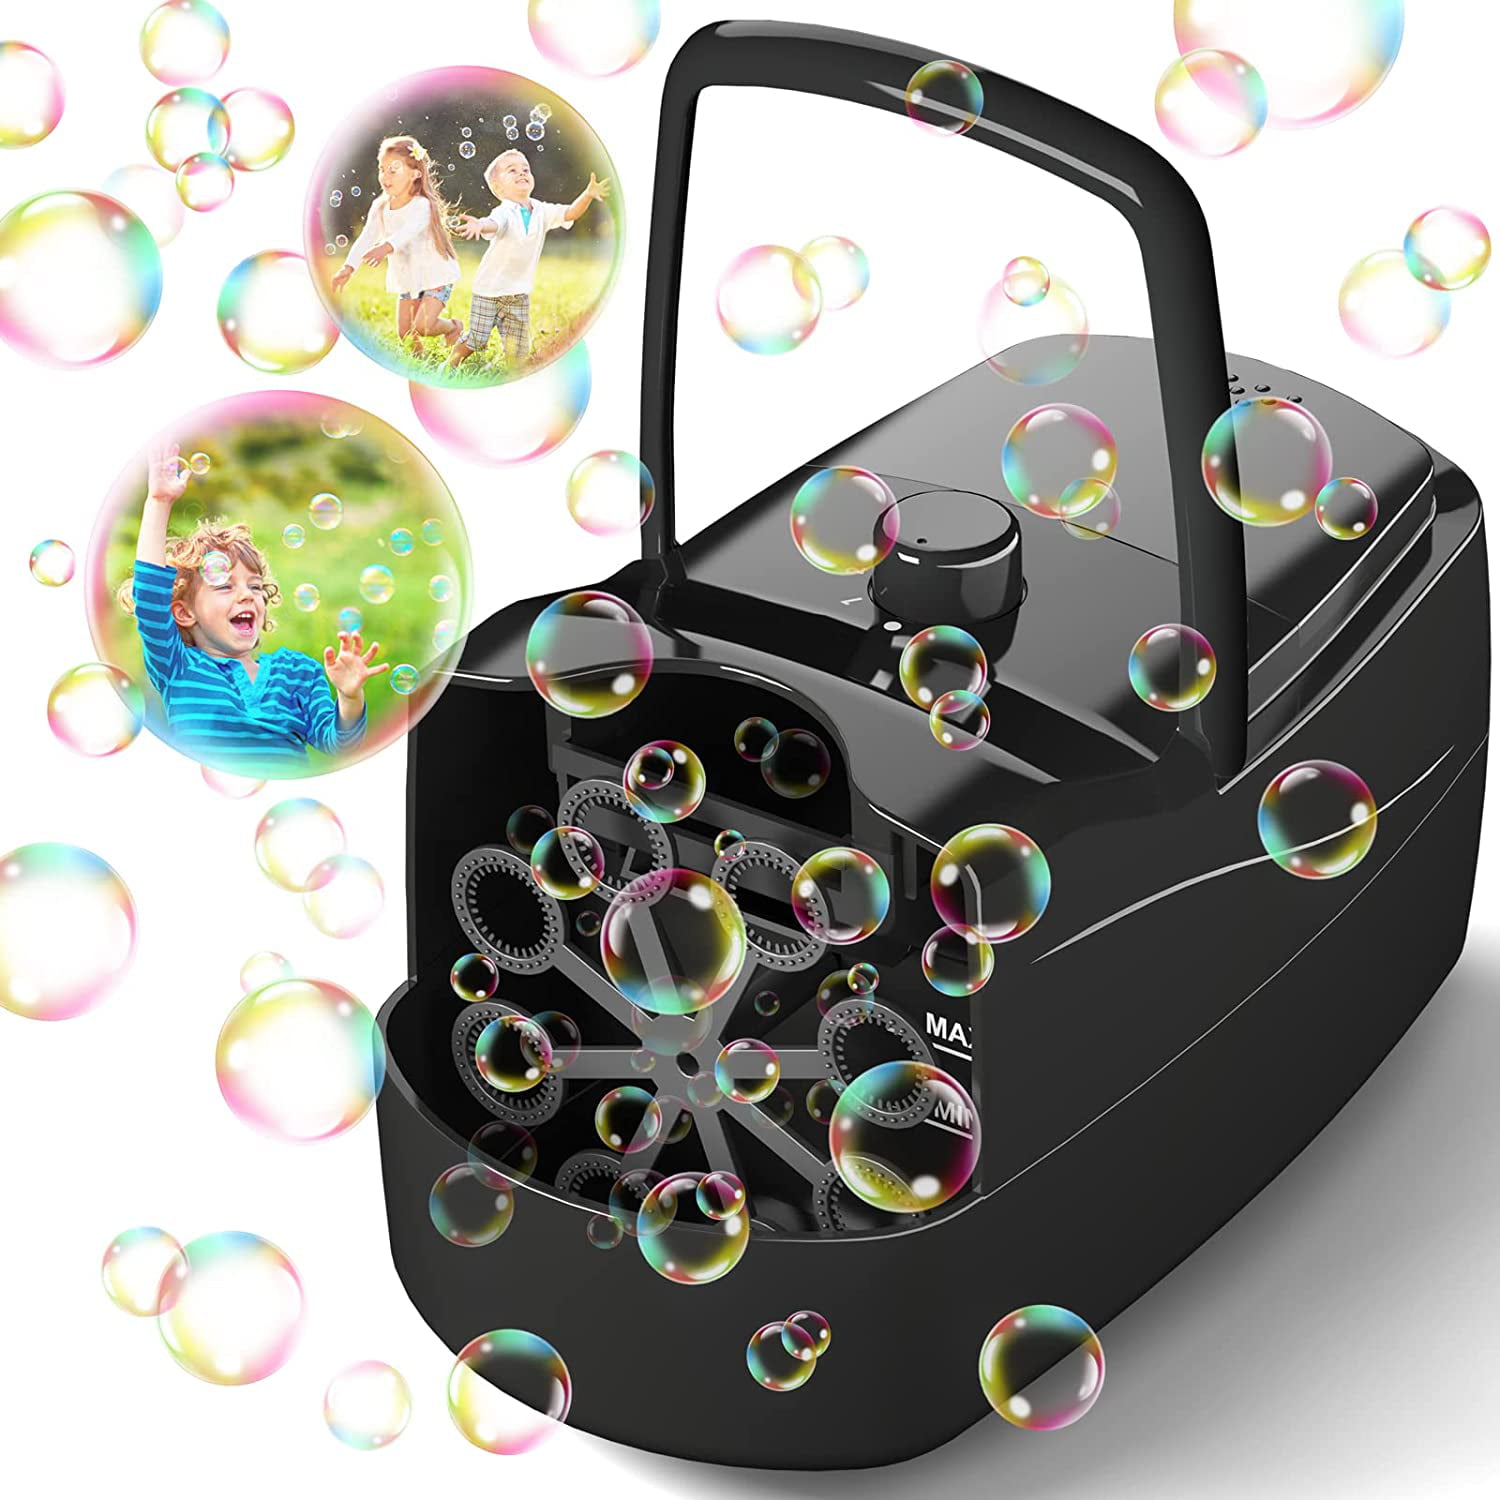 Bubble Machine Automatic Bubble Blower 5000 Bubbles Per /min Bubbles for Kids Toddlers Bubble Maker Operated by Plugin or Batteries Bubble Toys for Indoor Outdoor Birthday Parties 